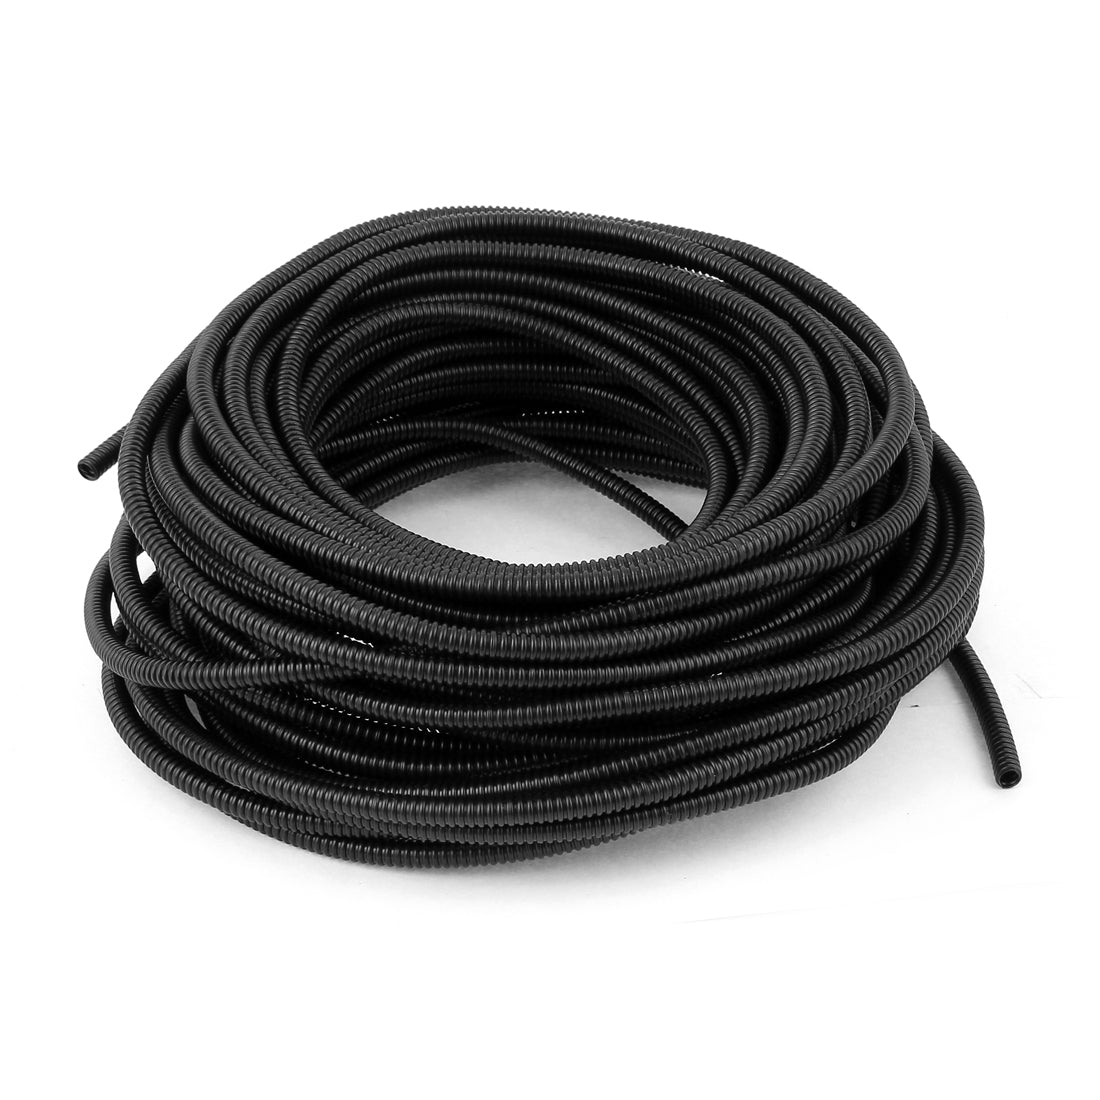 uxcell Uxcell 21 M 5 x 7 mm Plastic Flexible Corrugated Conduit Tube for Garden,Office Black